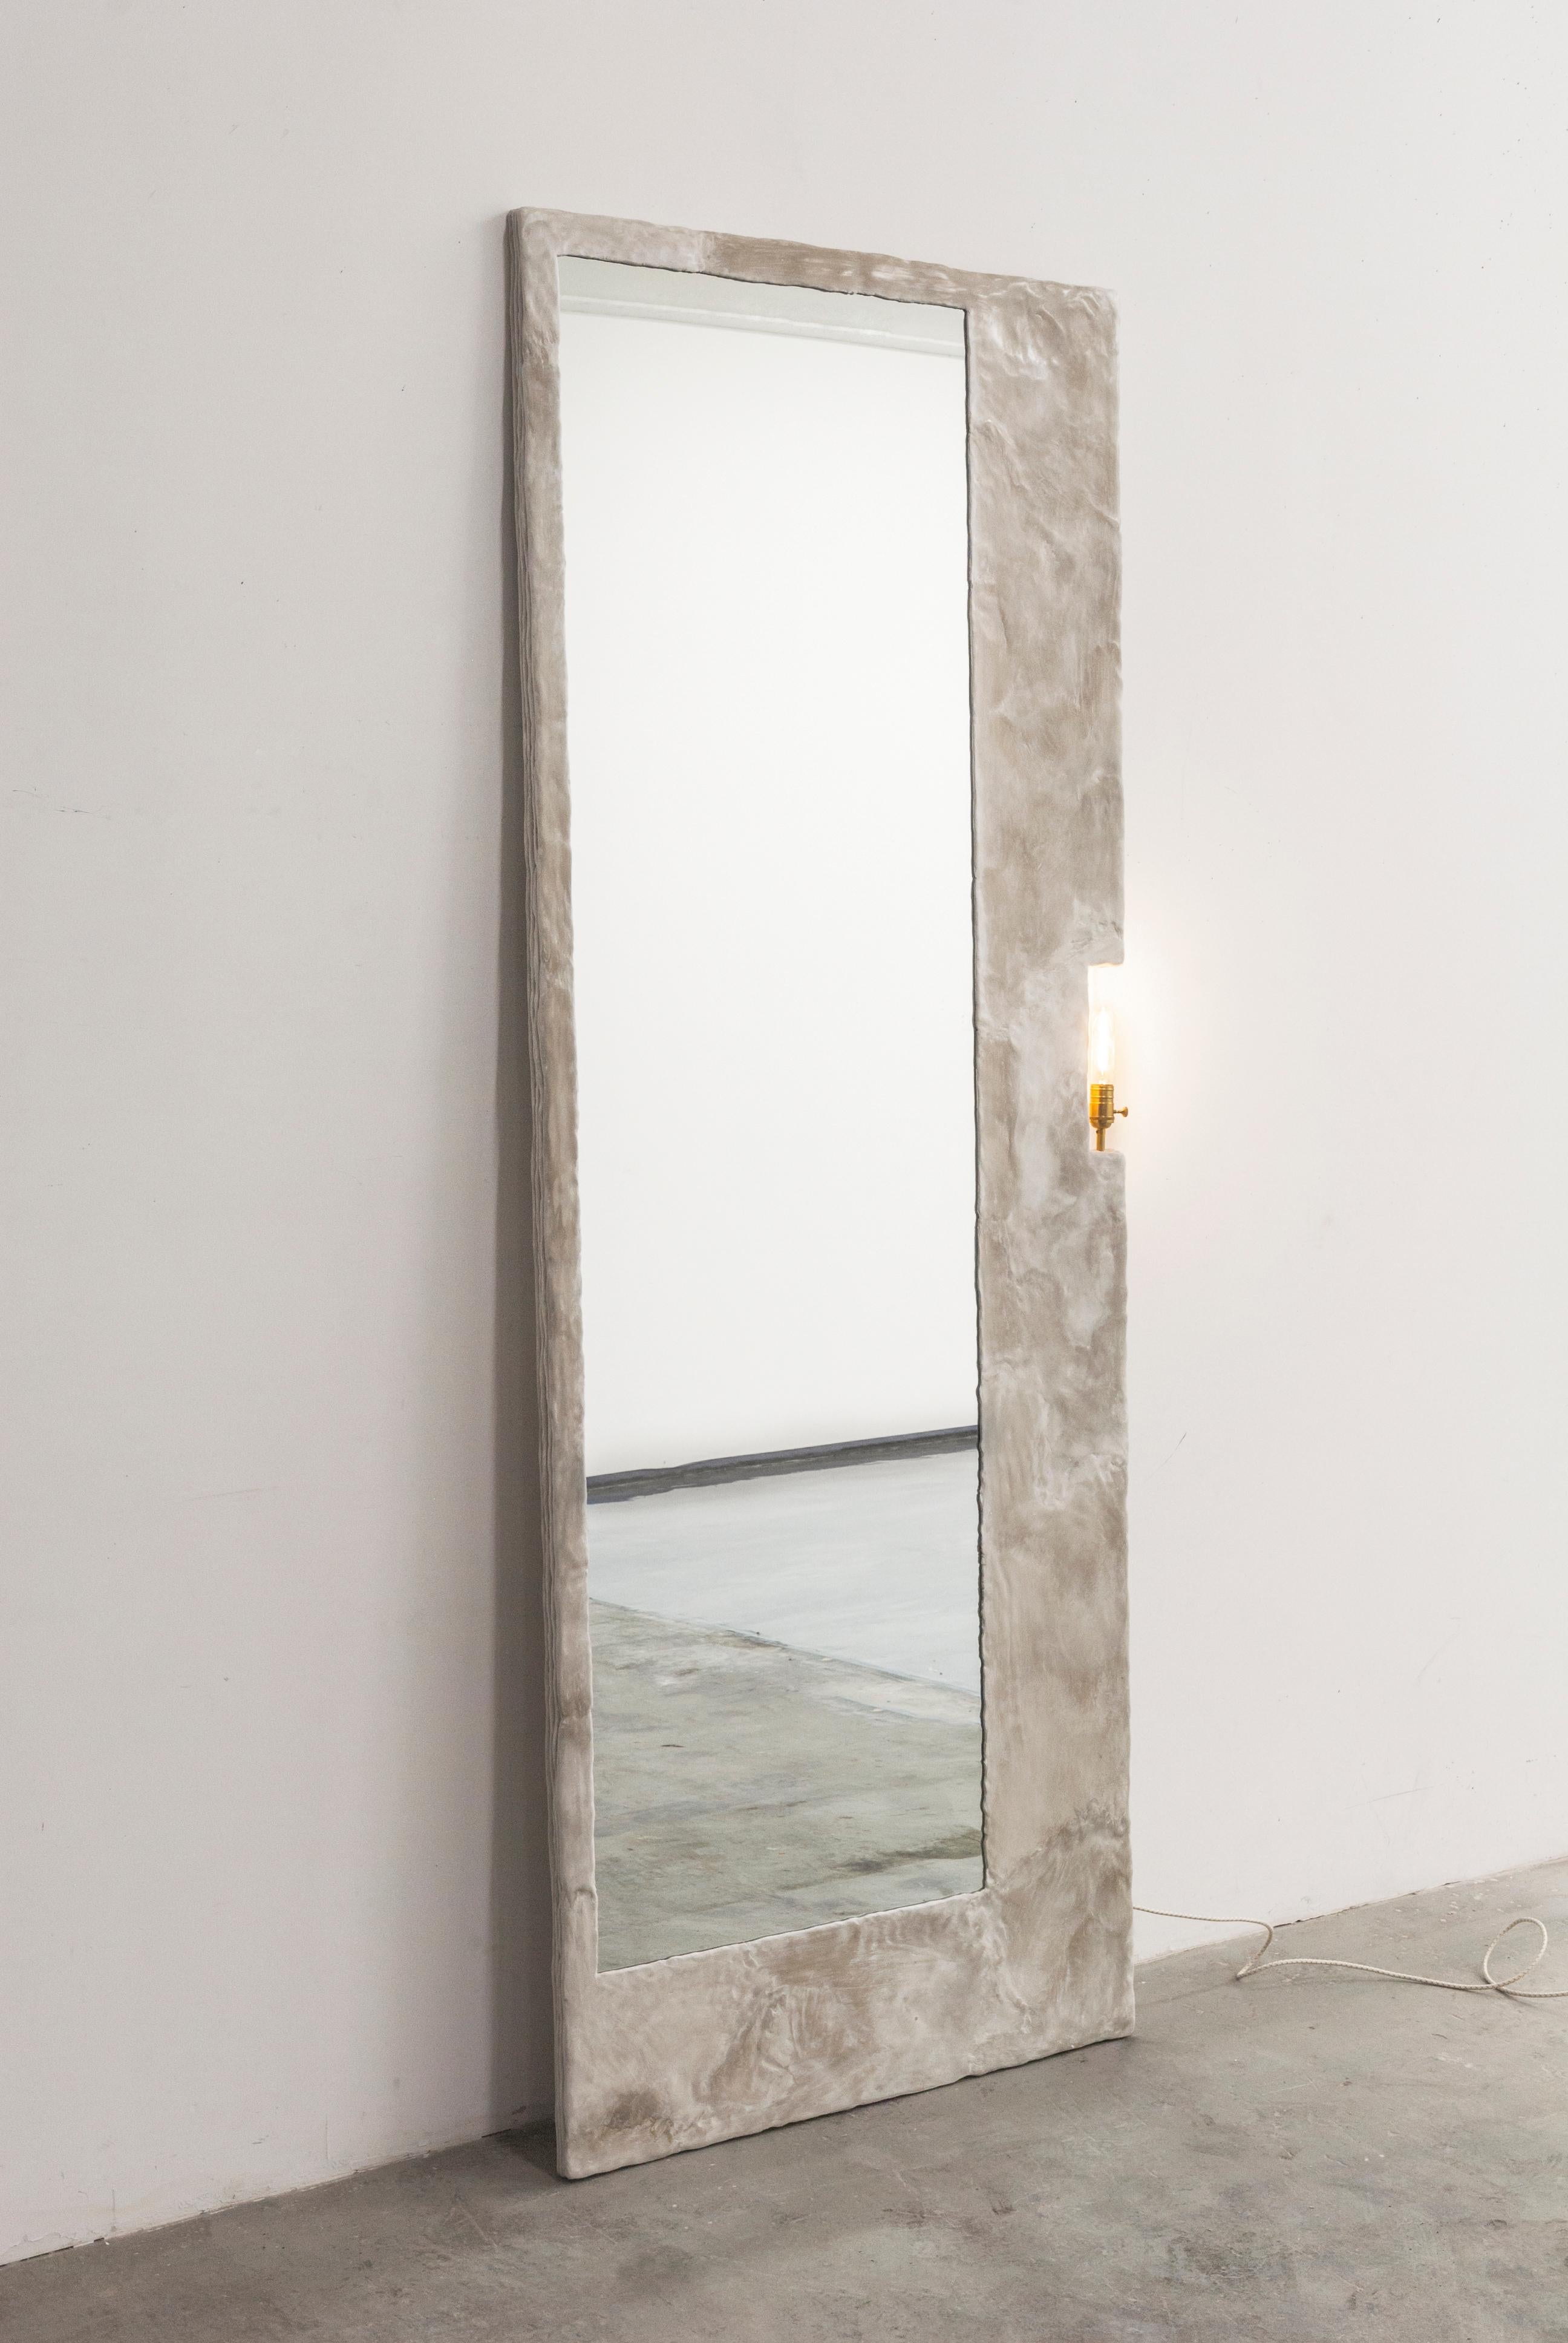 This full size mirror by Bailey Fontaine functions as both a mirror and a floor lamp. The work functions both as a utilitarian and practical piece for your space, and at the same time fulfills a sculptural aesthetic. As an emerging furniture